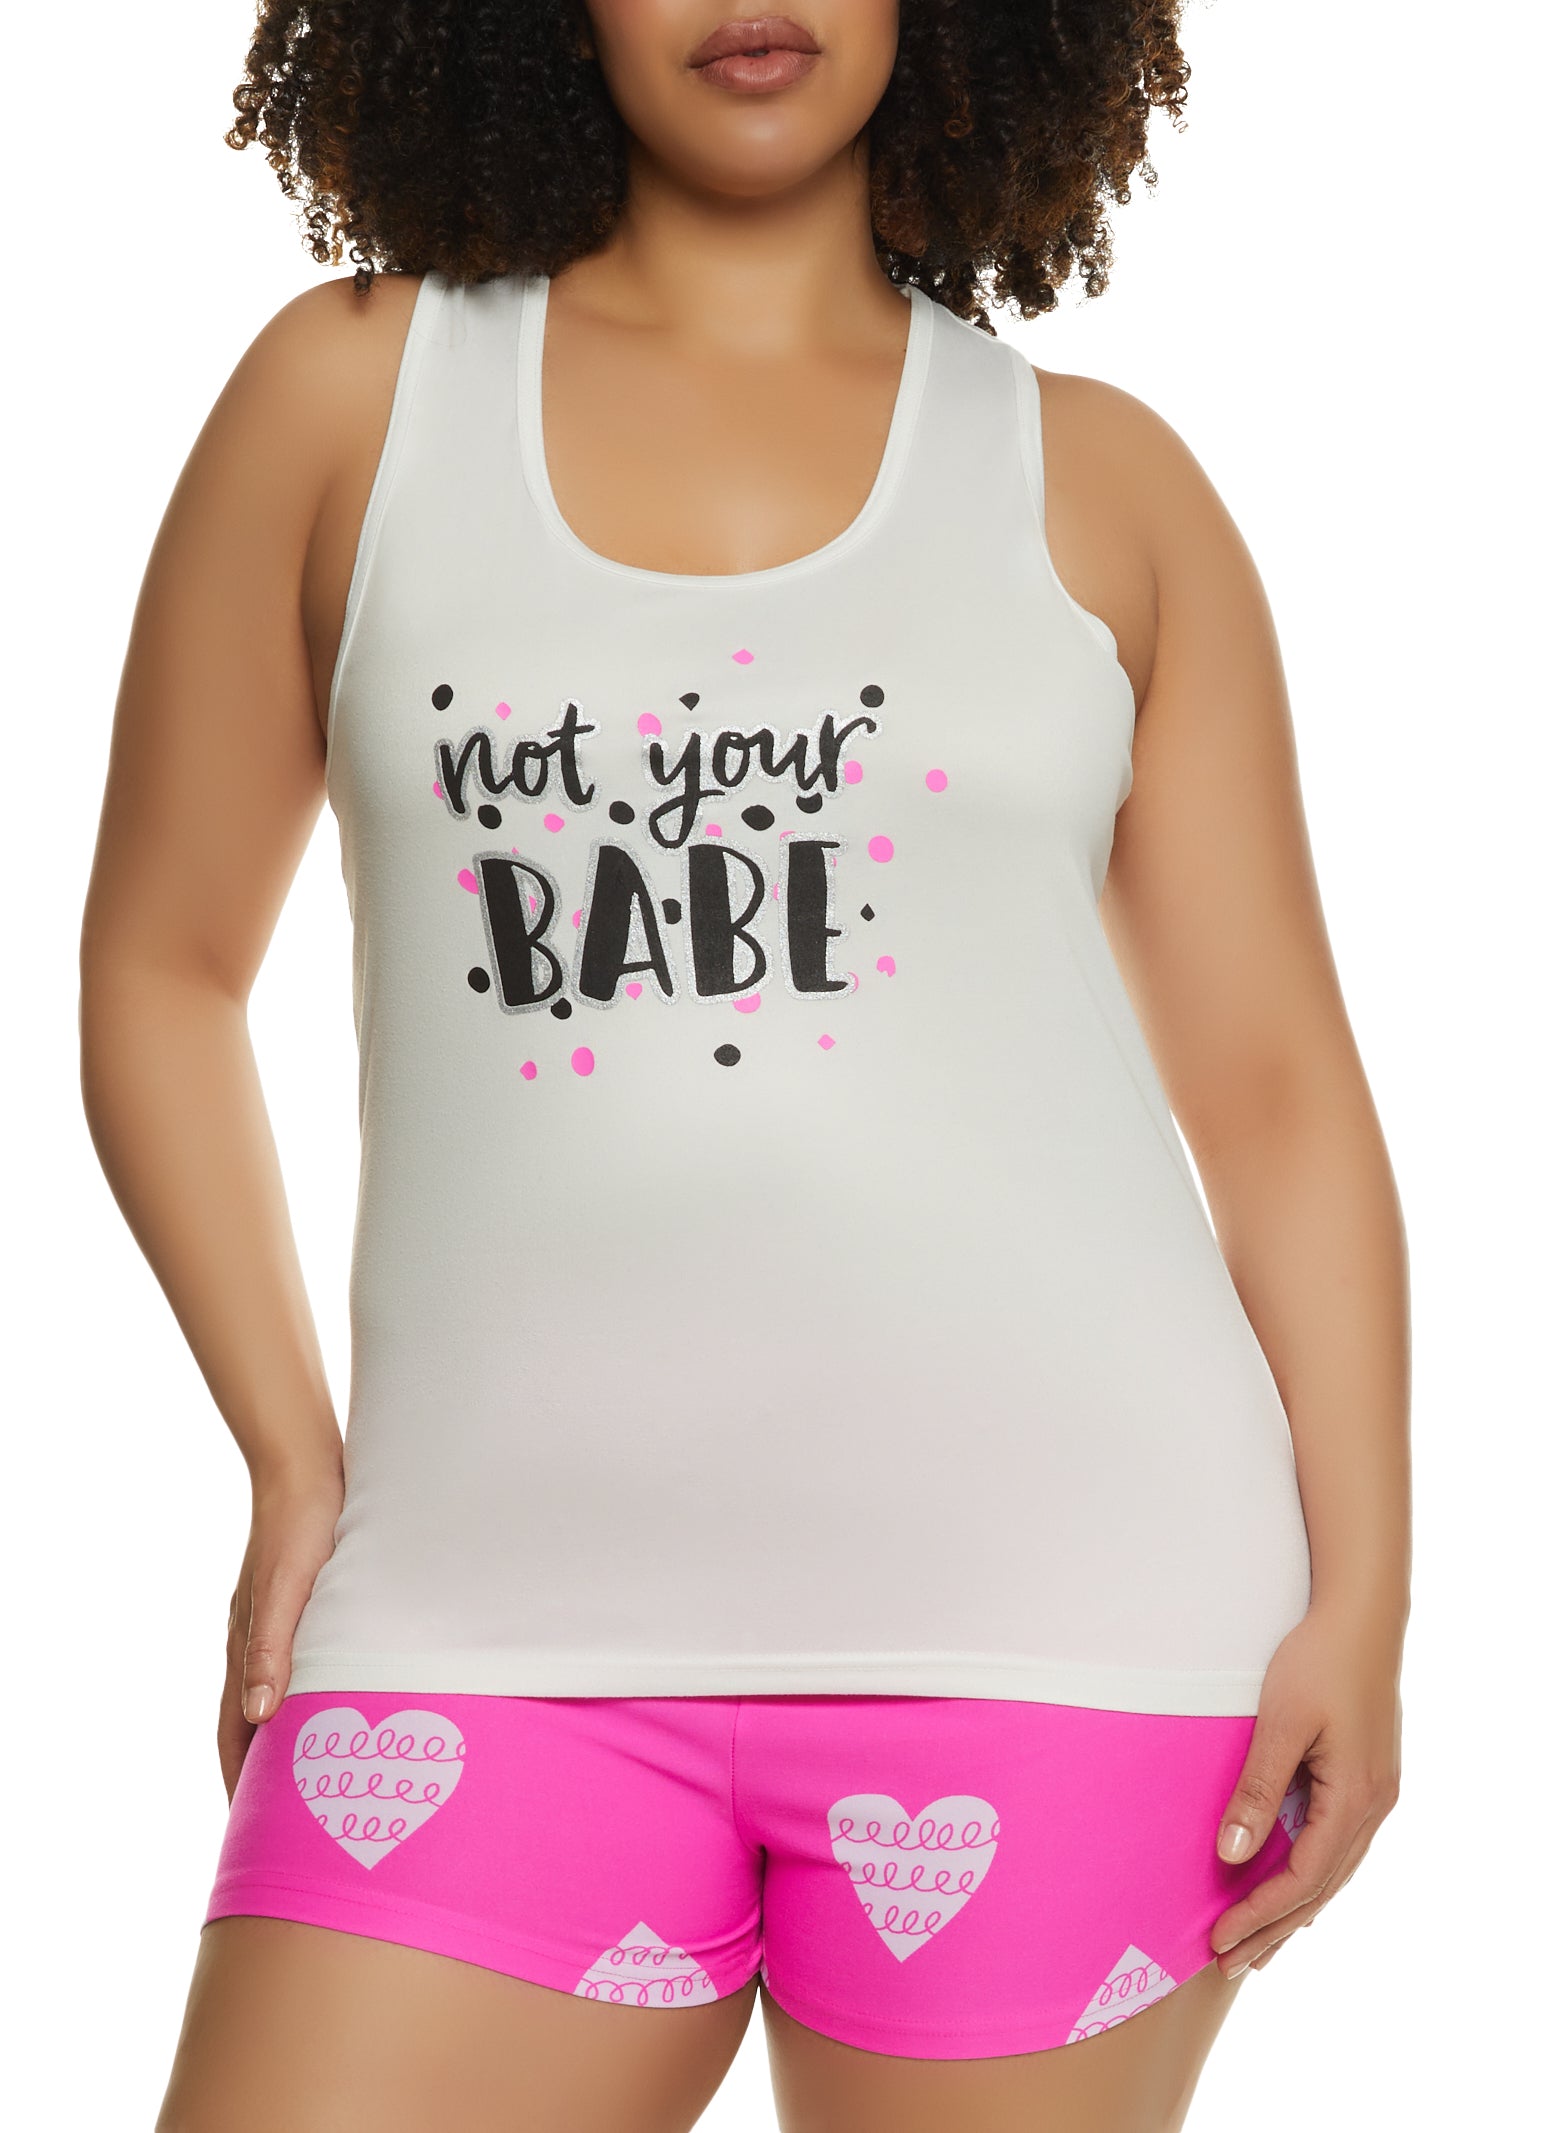 Womens Plus Size Not Your Babe Pajama Tank Top and Shorts, White, Size 1X